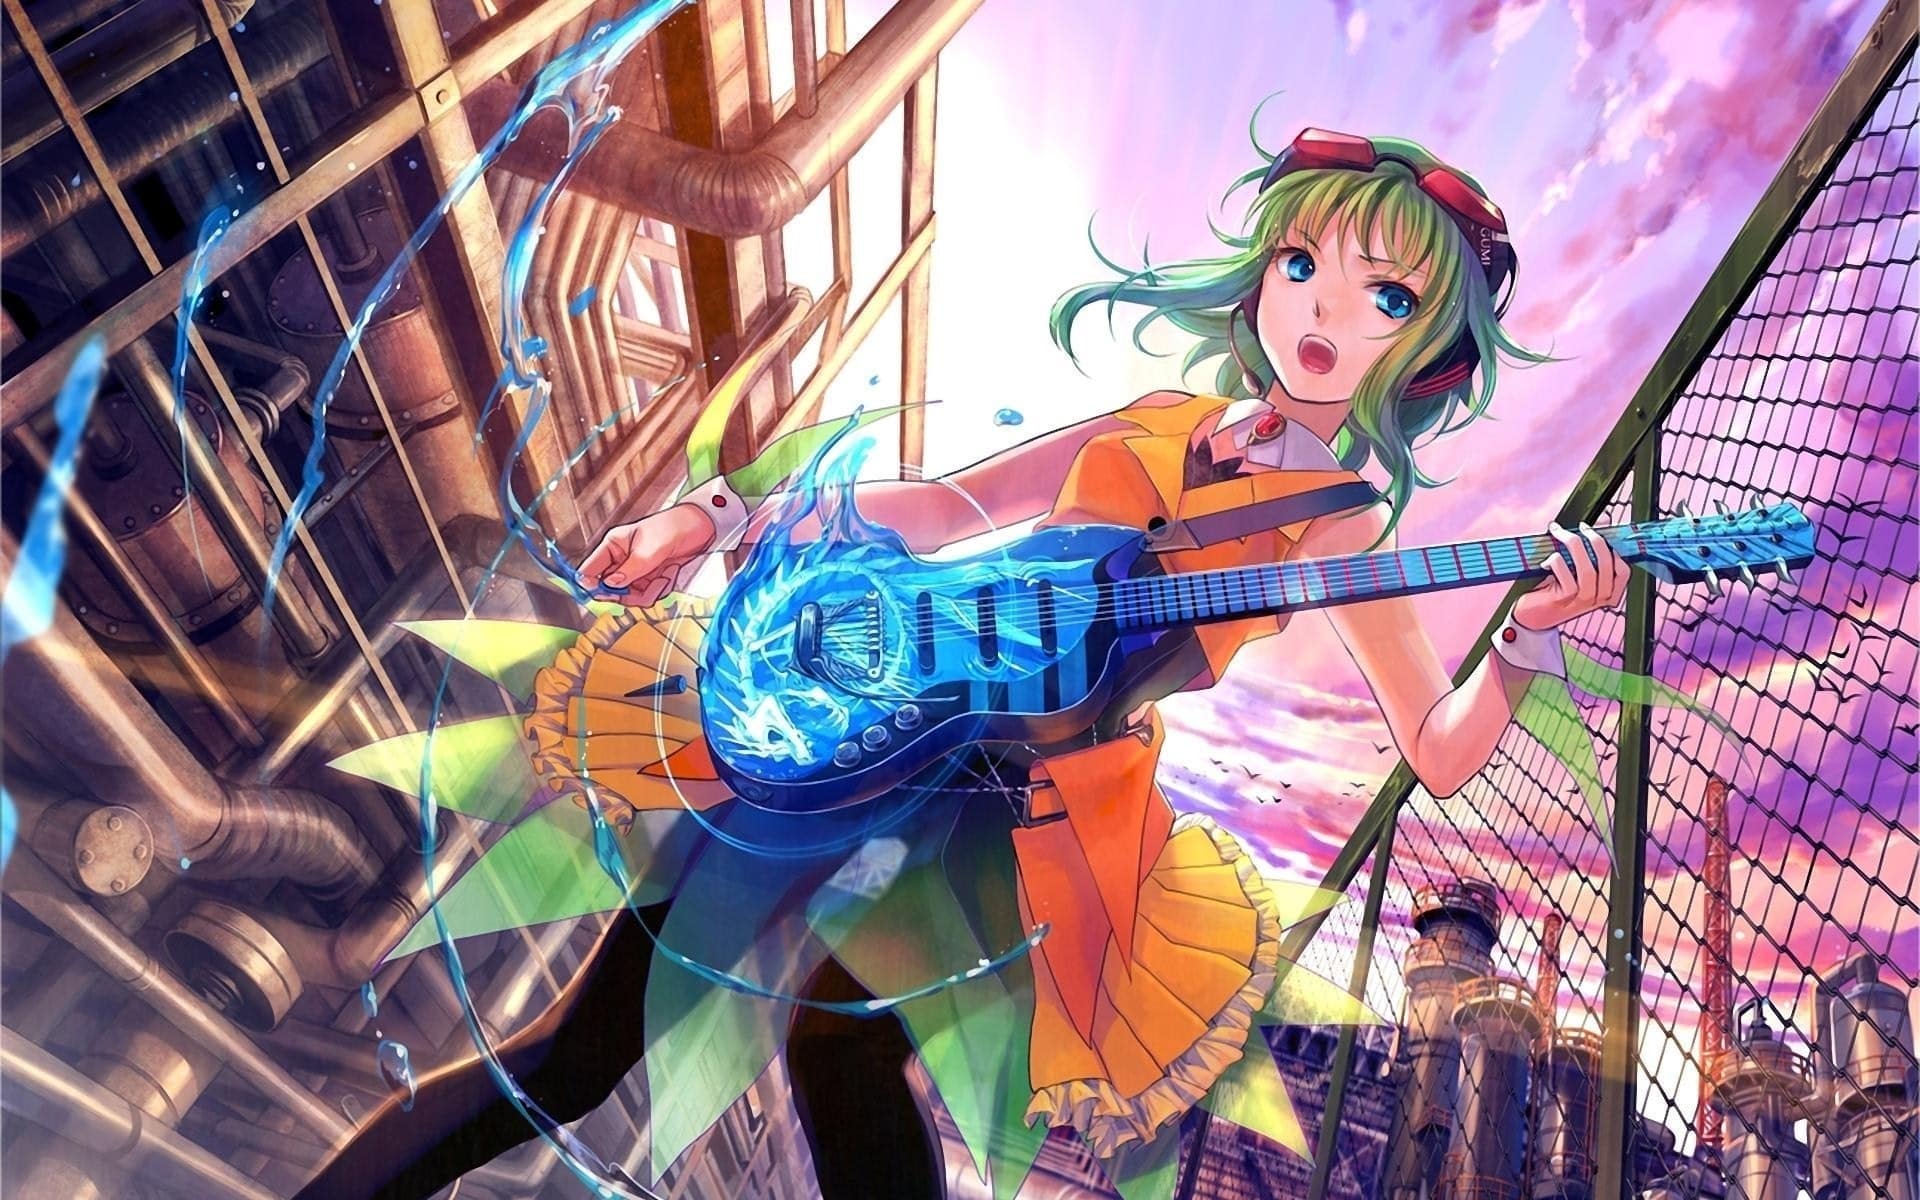 GUMI from VOCALOID6